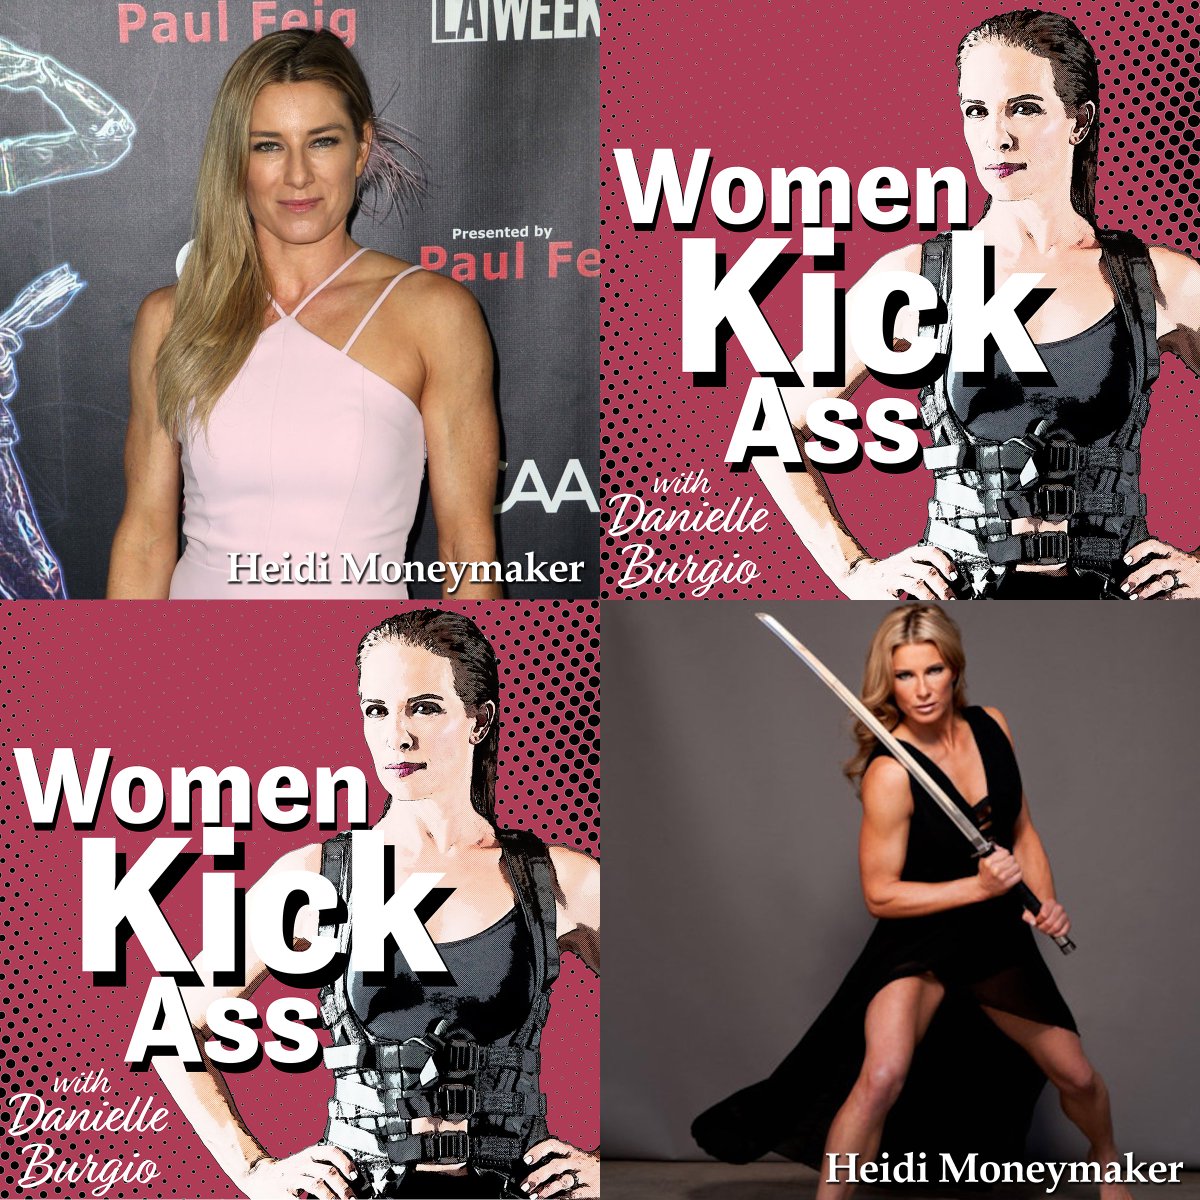 WooHOO! Check out the #WomenKickAss Podcast. Join @DaniBurgio1111 while she speaks to @HeidiMoney about her stunt career, the #MarvelVerse, and taking care of herself. #WomenKickAss 

#HeidiMoneymaker #DanielleBurgio #StuntWomen #StandUpForStunts

womenkickass.libsyn.com/women-kick-ass…